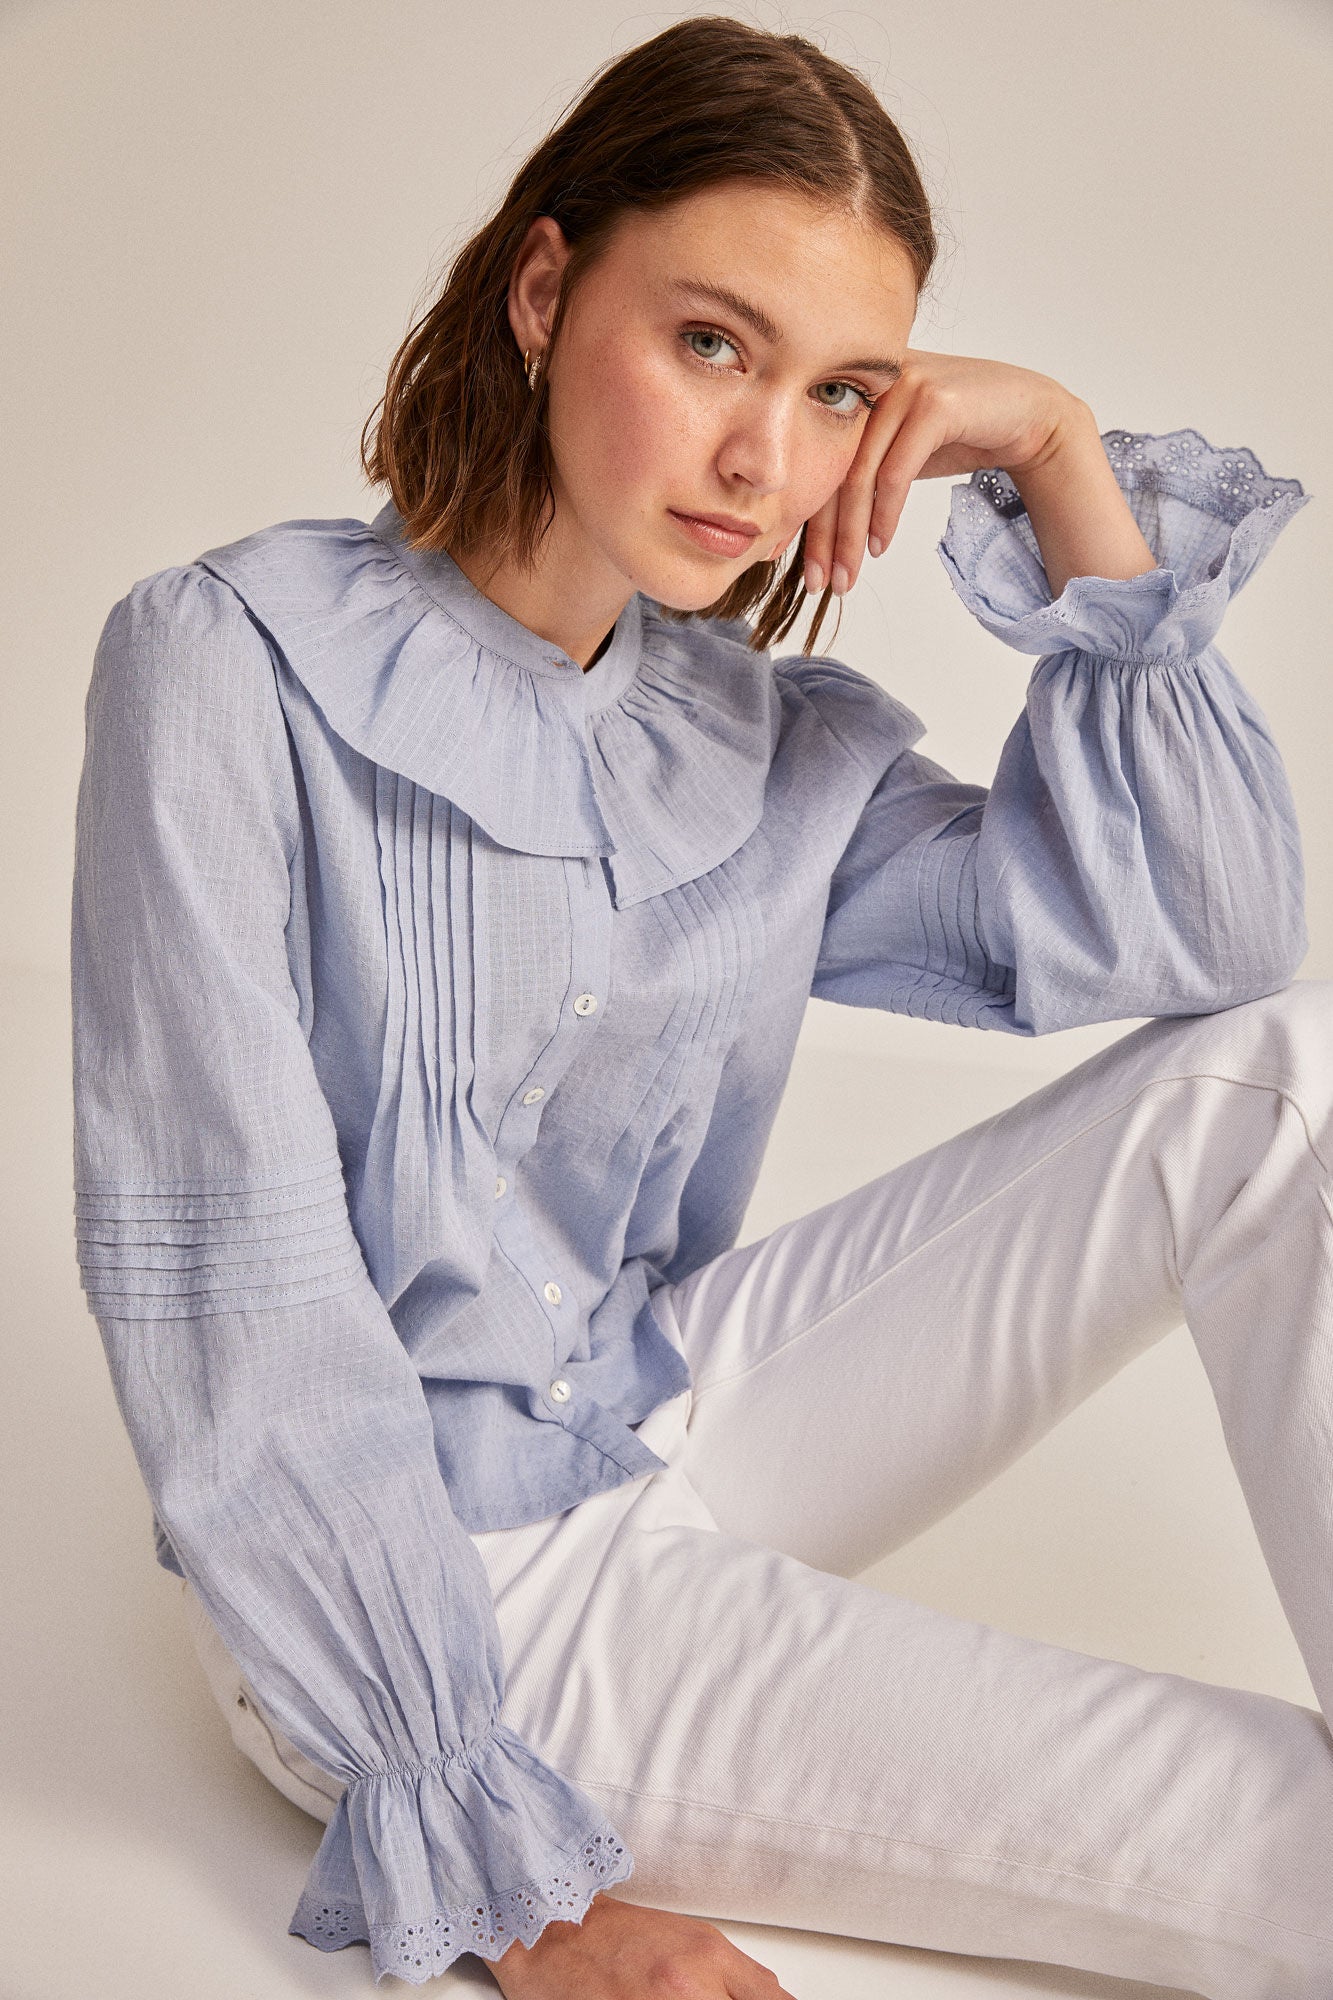 Pleated Peter Pan collar blouse